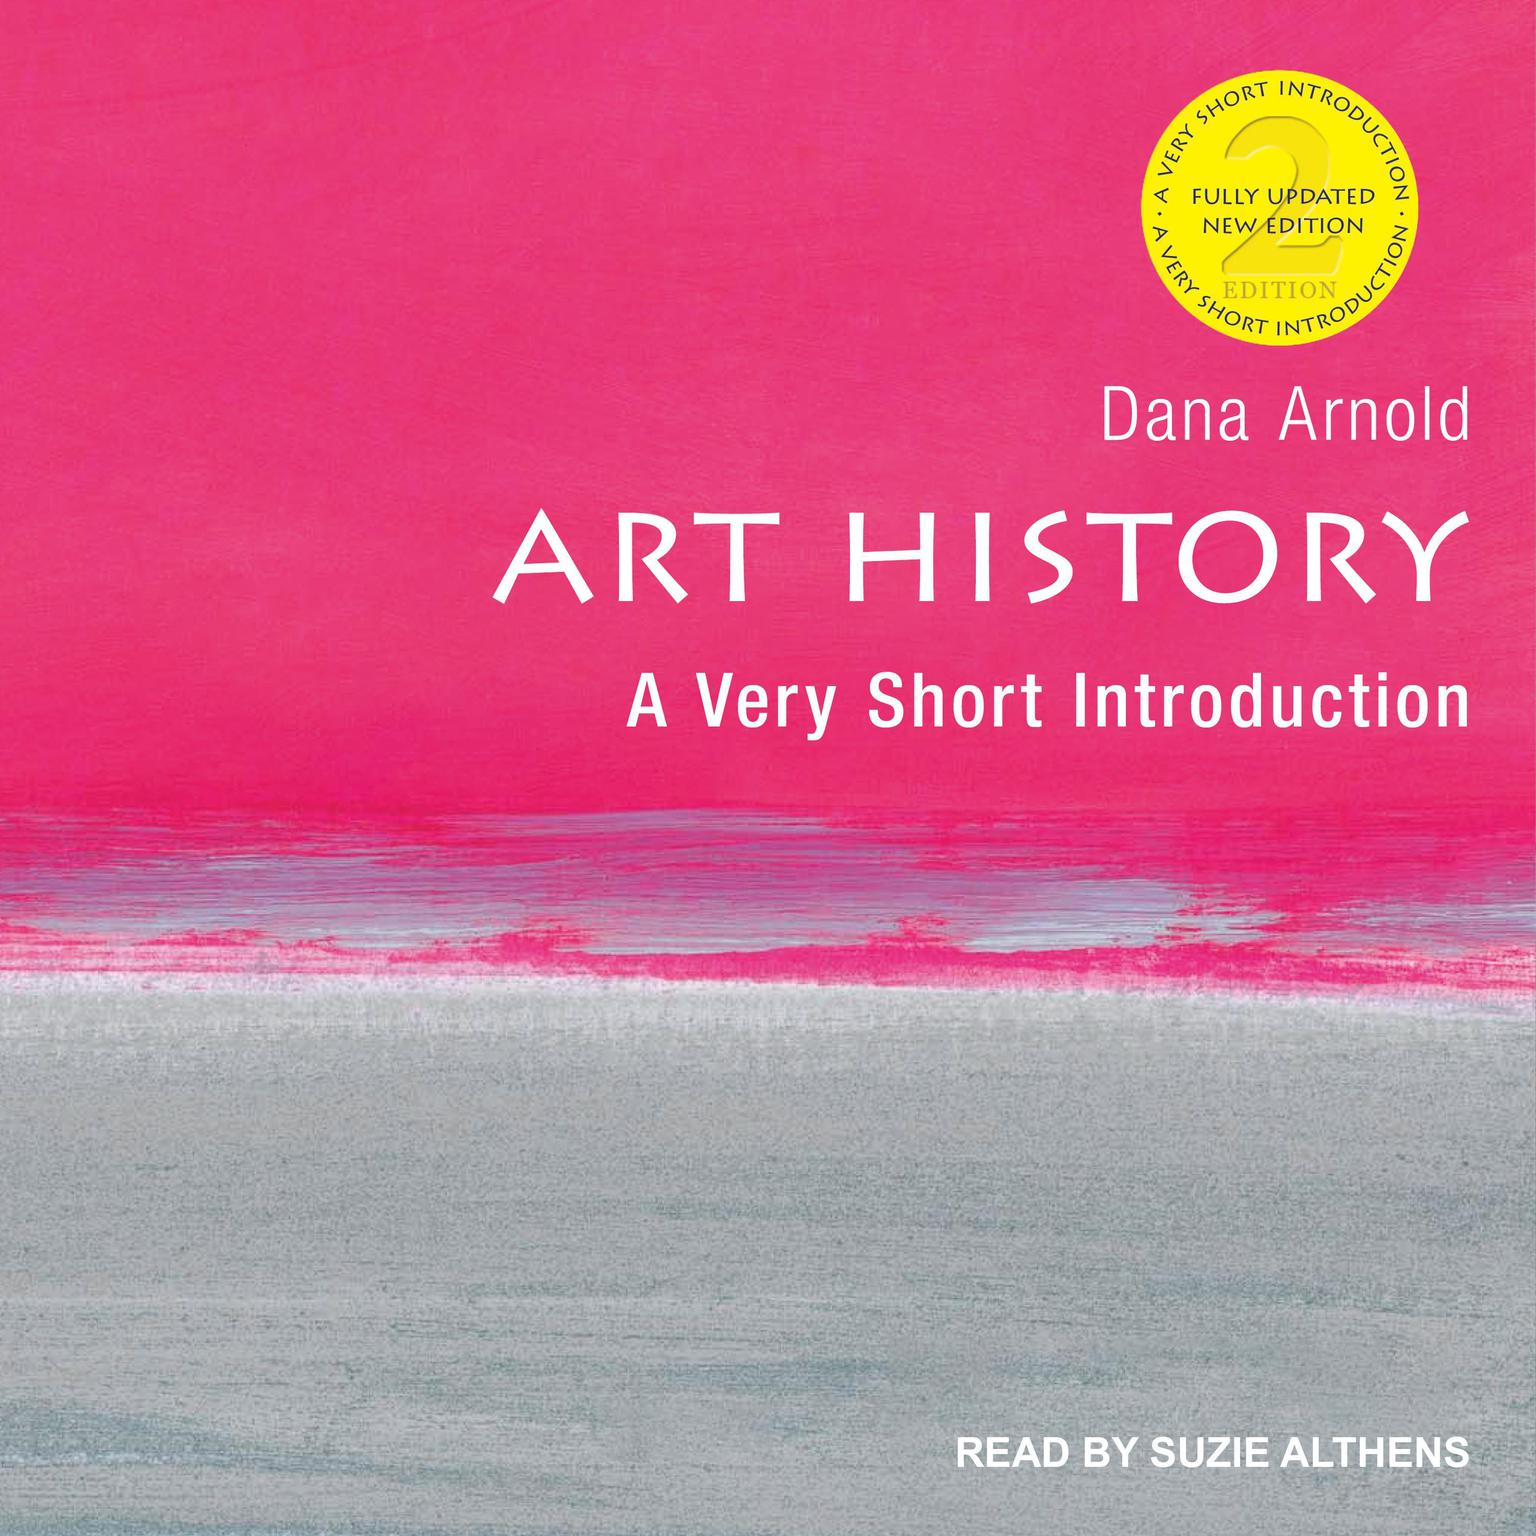 Art History: A Very Short Introduction, 2nd edition Audiobook, by Dana Arnold